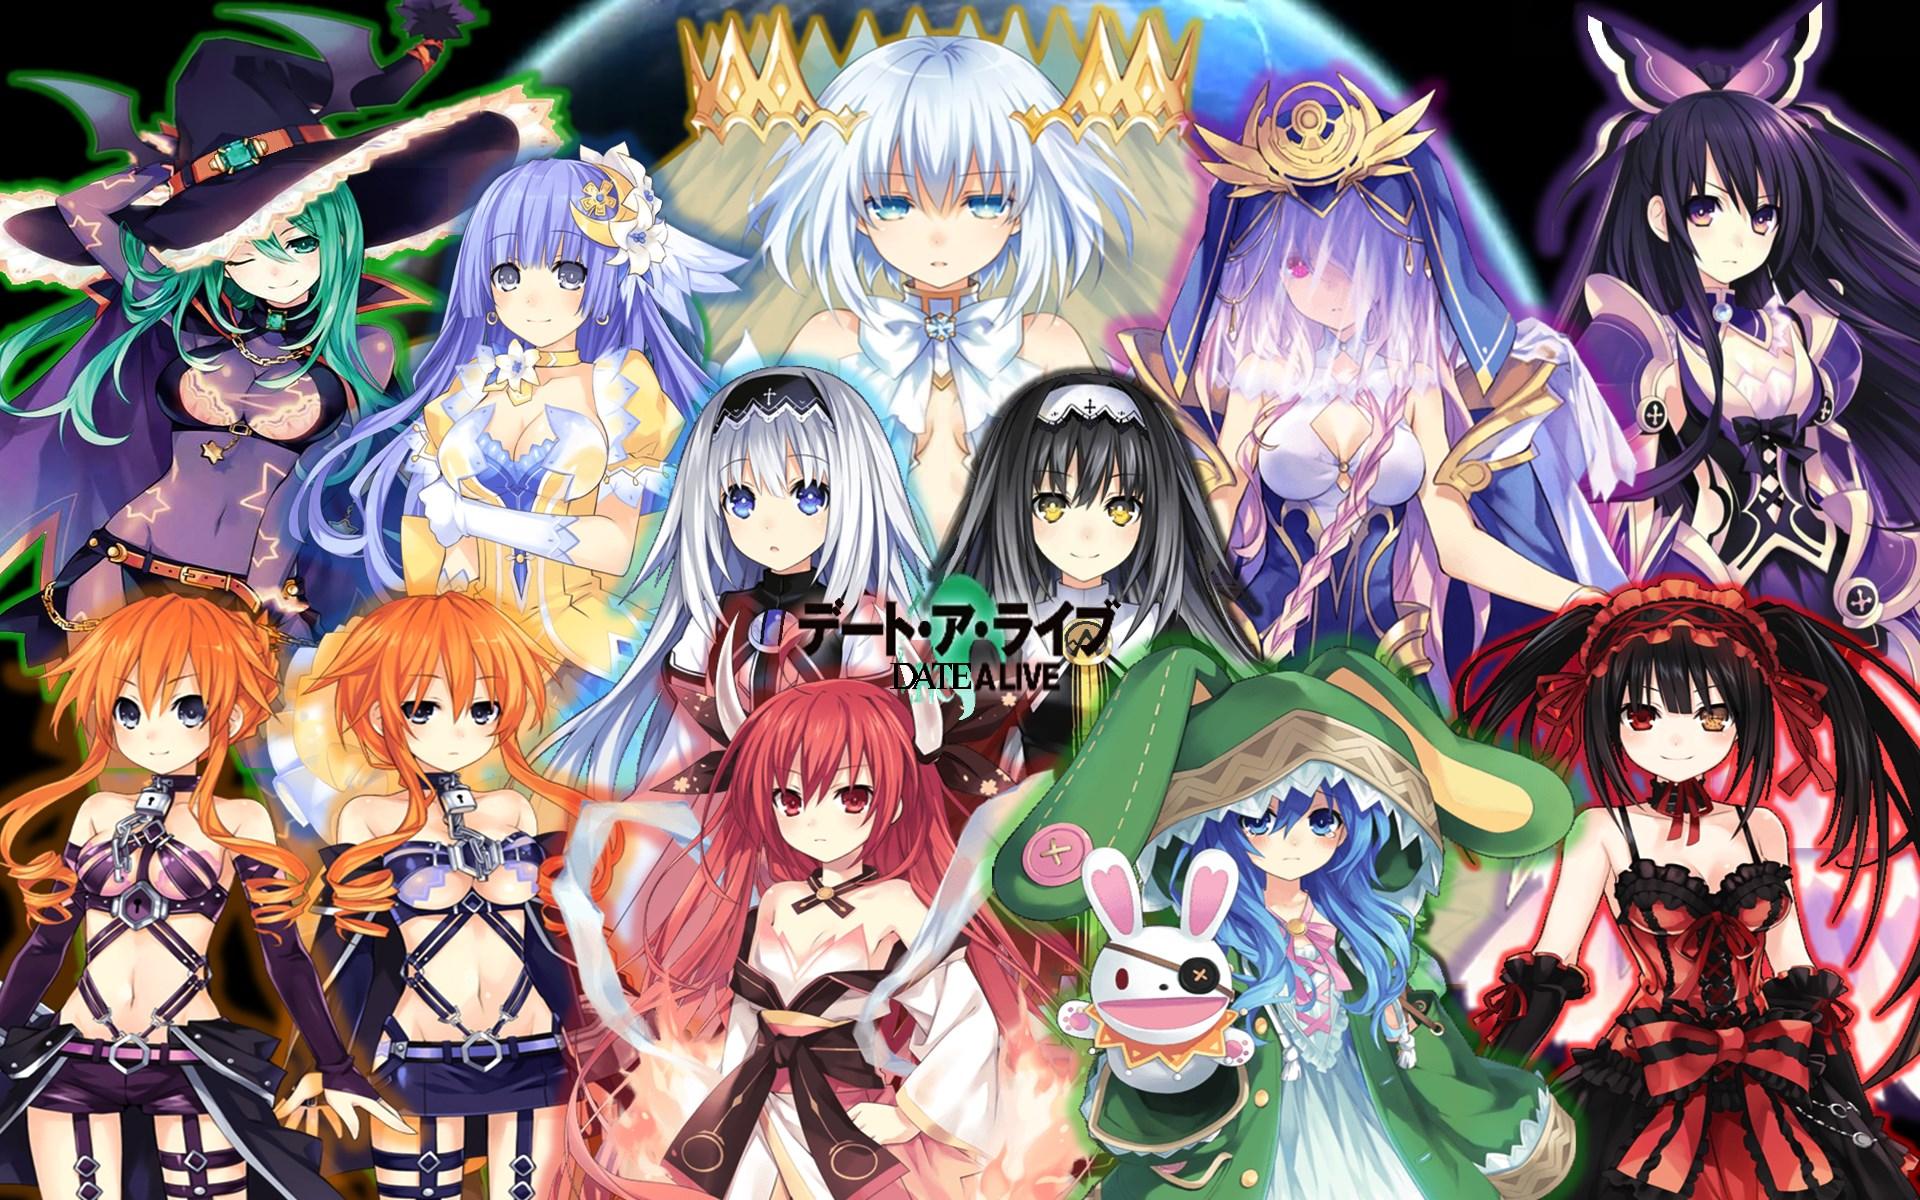 Date A Live IV icon by NocturneXI on DeviantArt